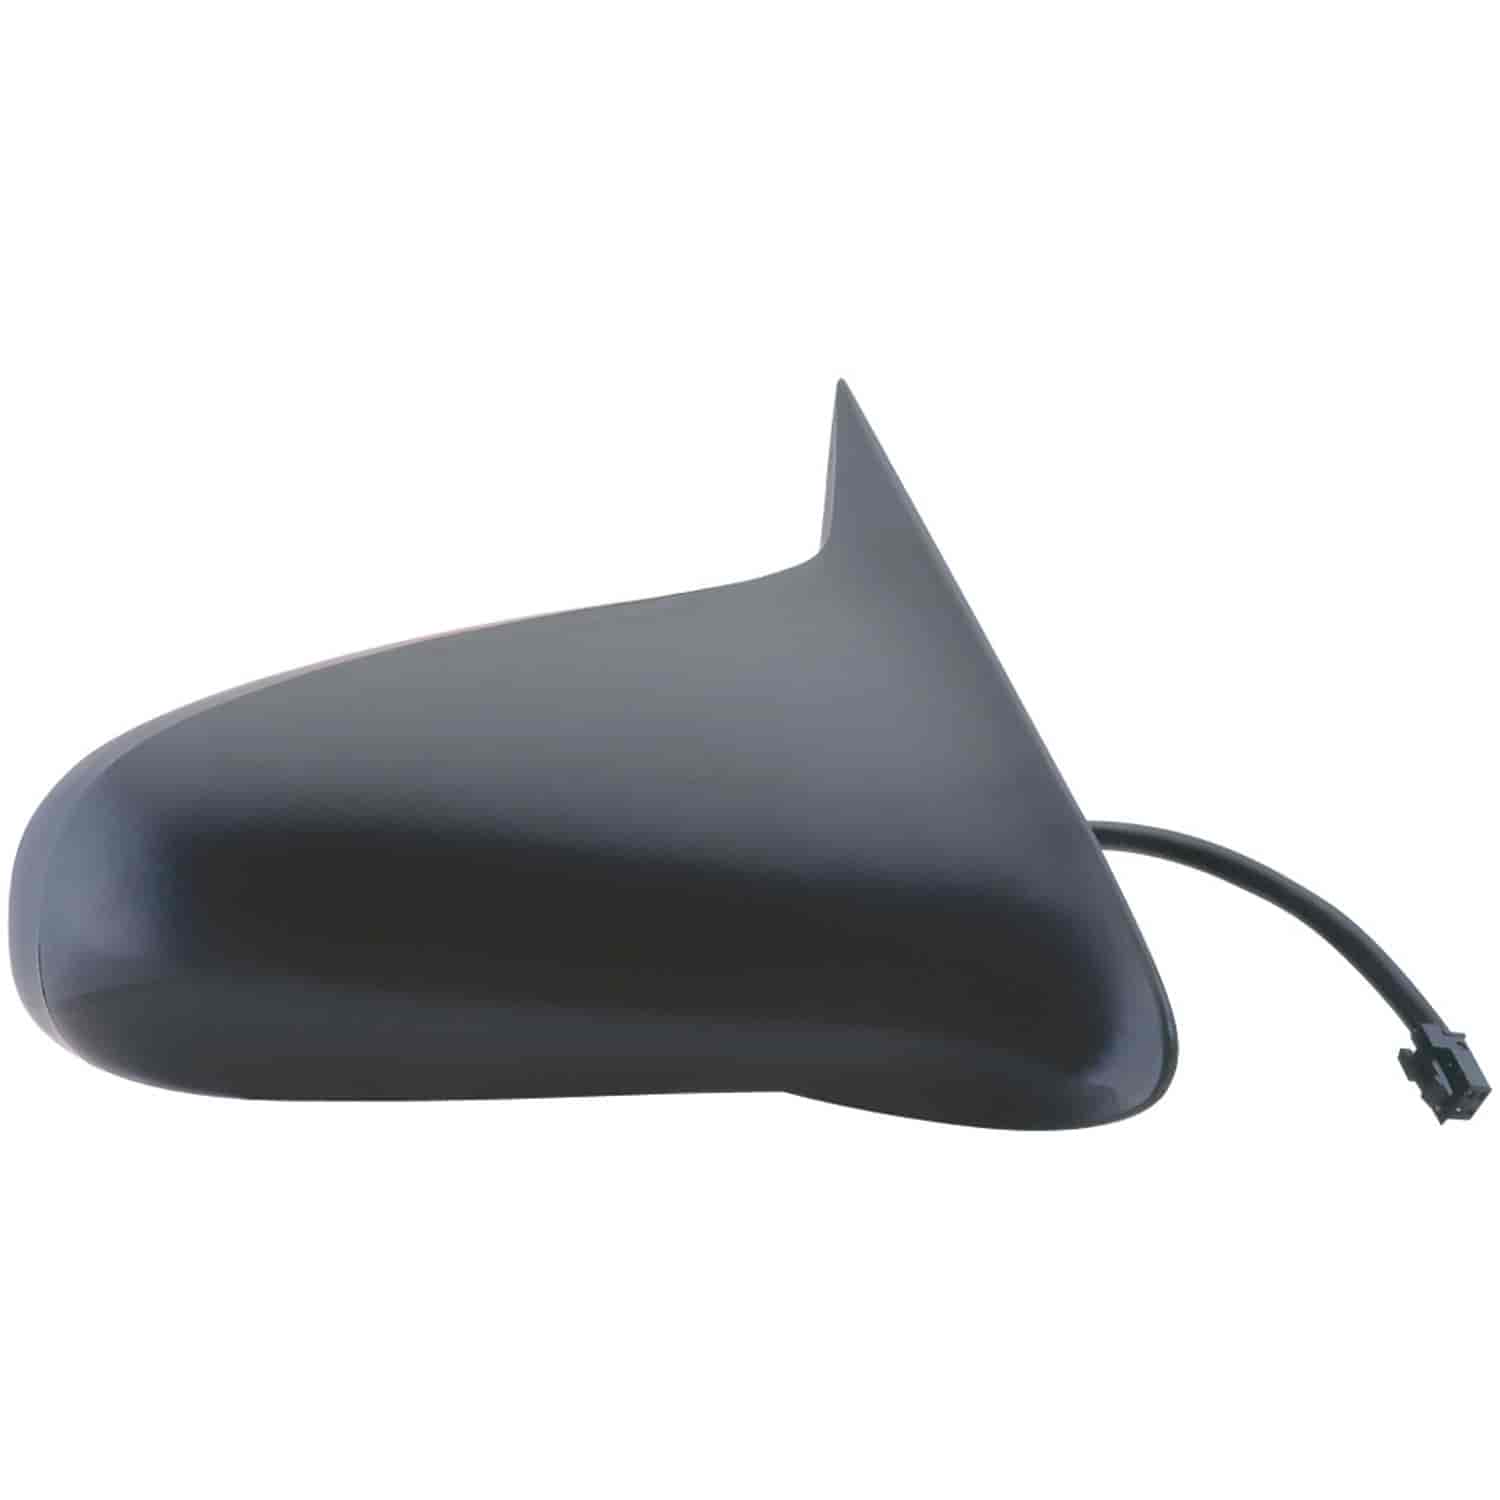 OEM Style Replacement mirror for 95-99 Chevrolet Monte Carlo passenger side mirror tested to fit and